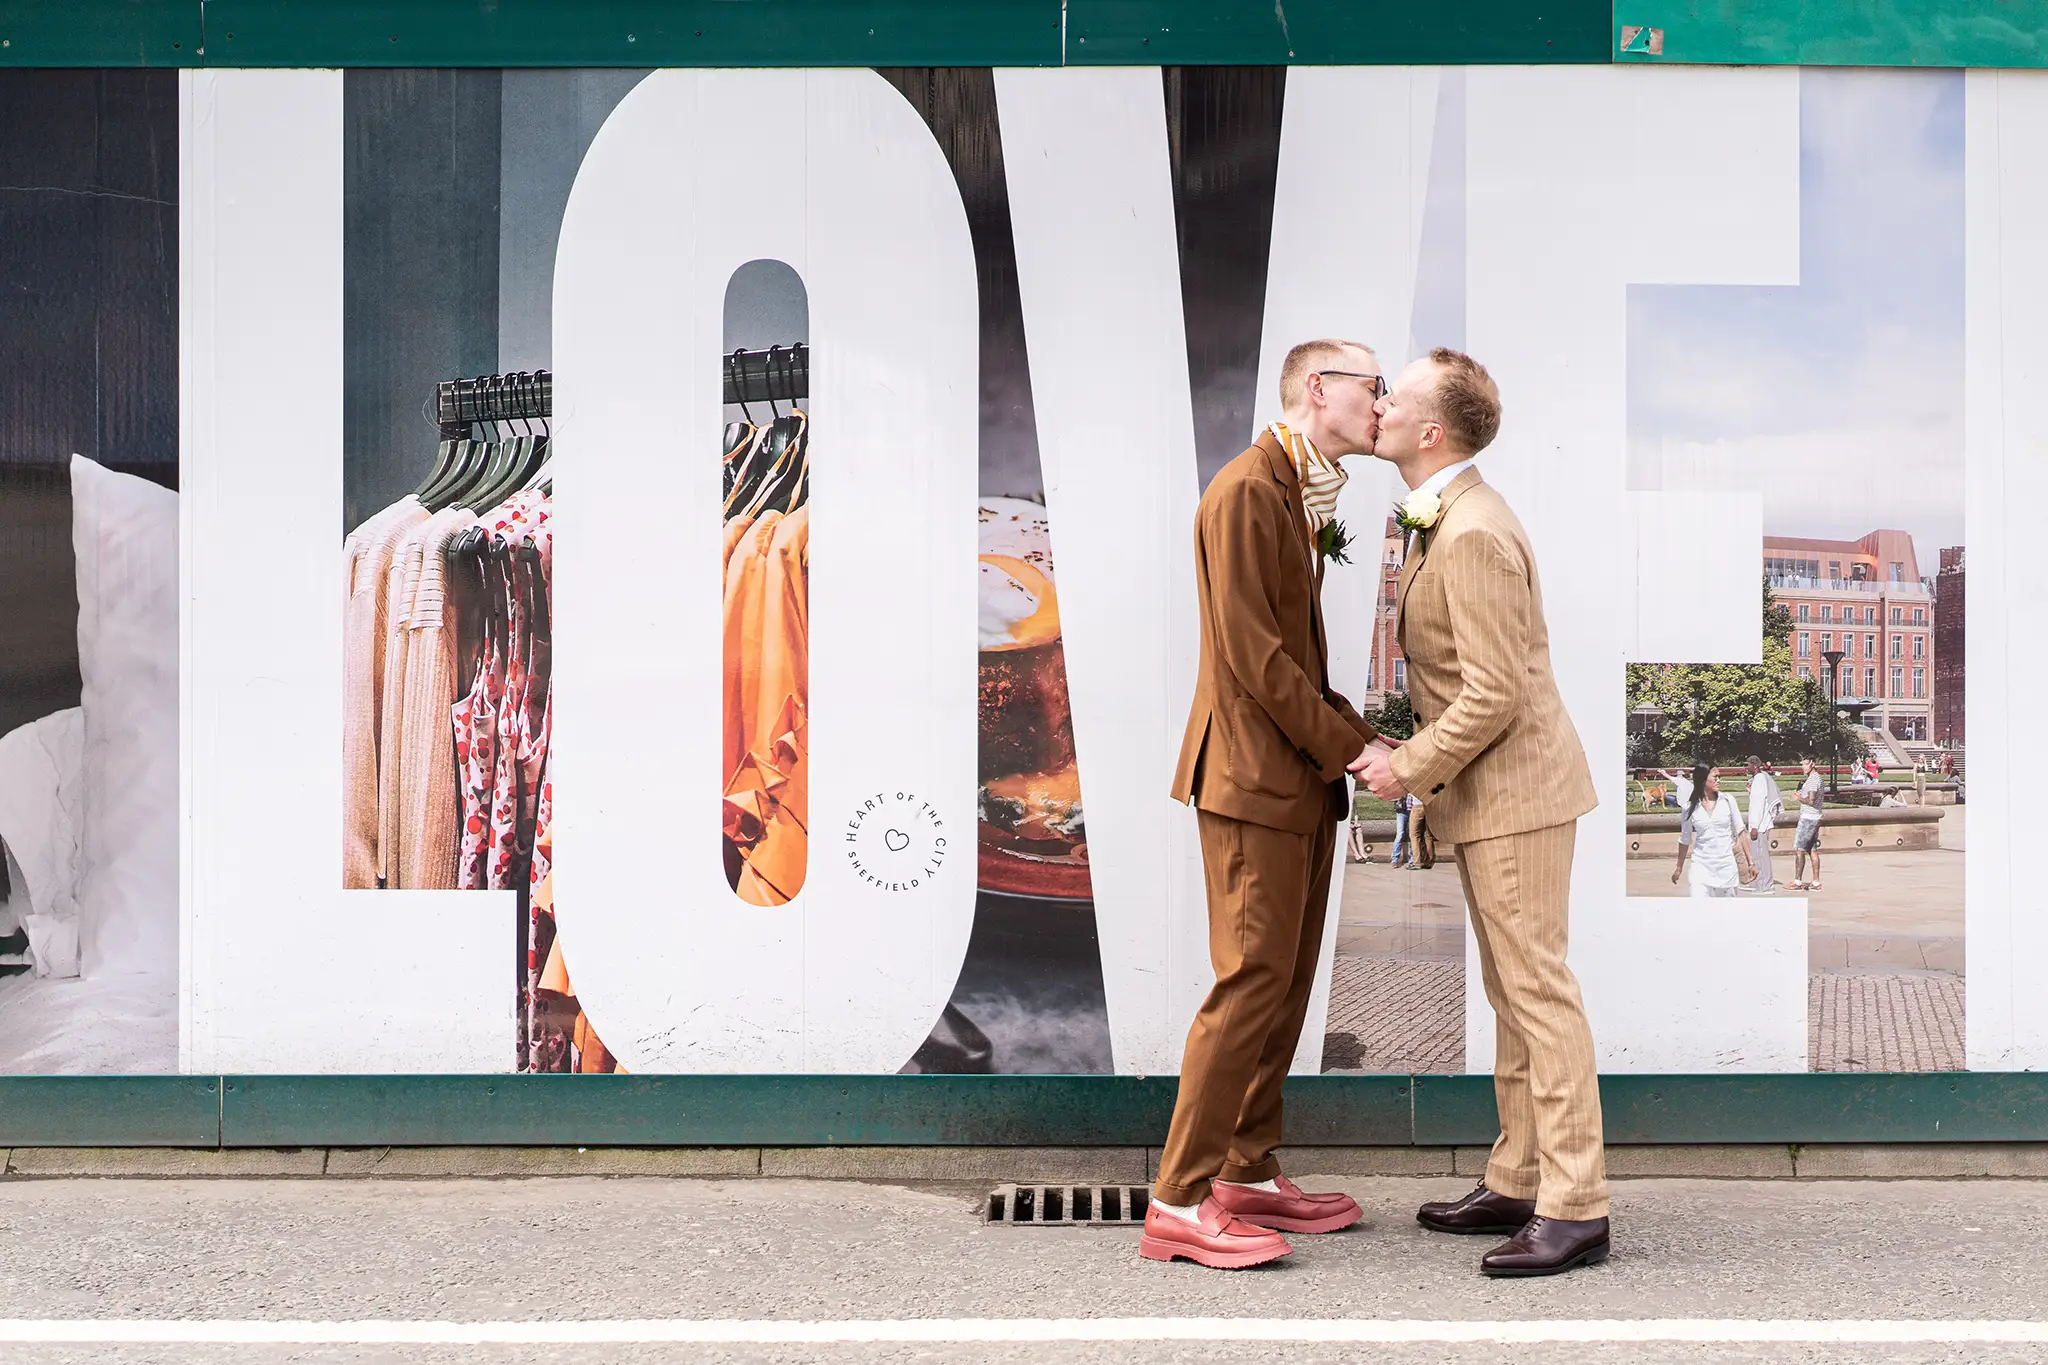 Sheffield wedding photographer Nate Dainty capturing a first look in front of a hoarding with LOVE written on it